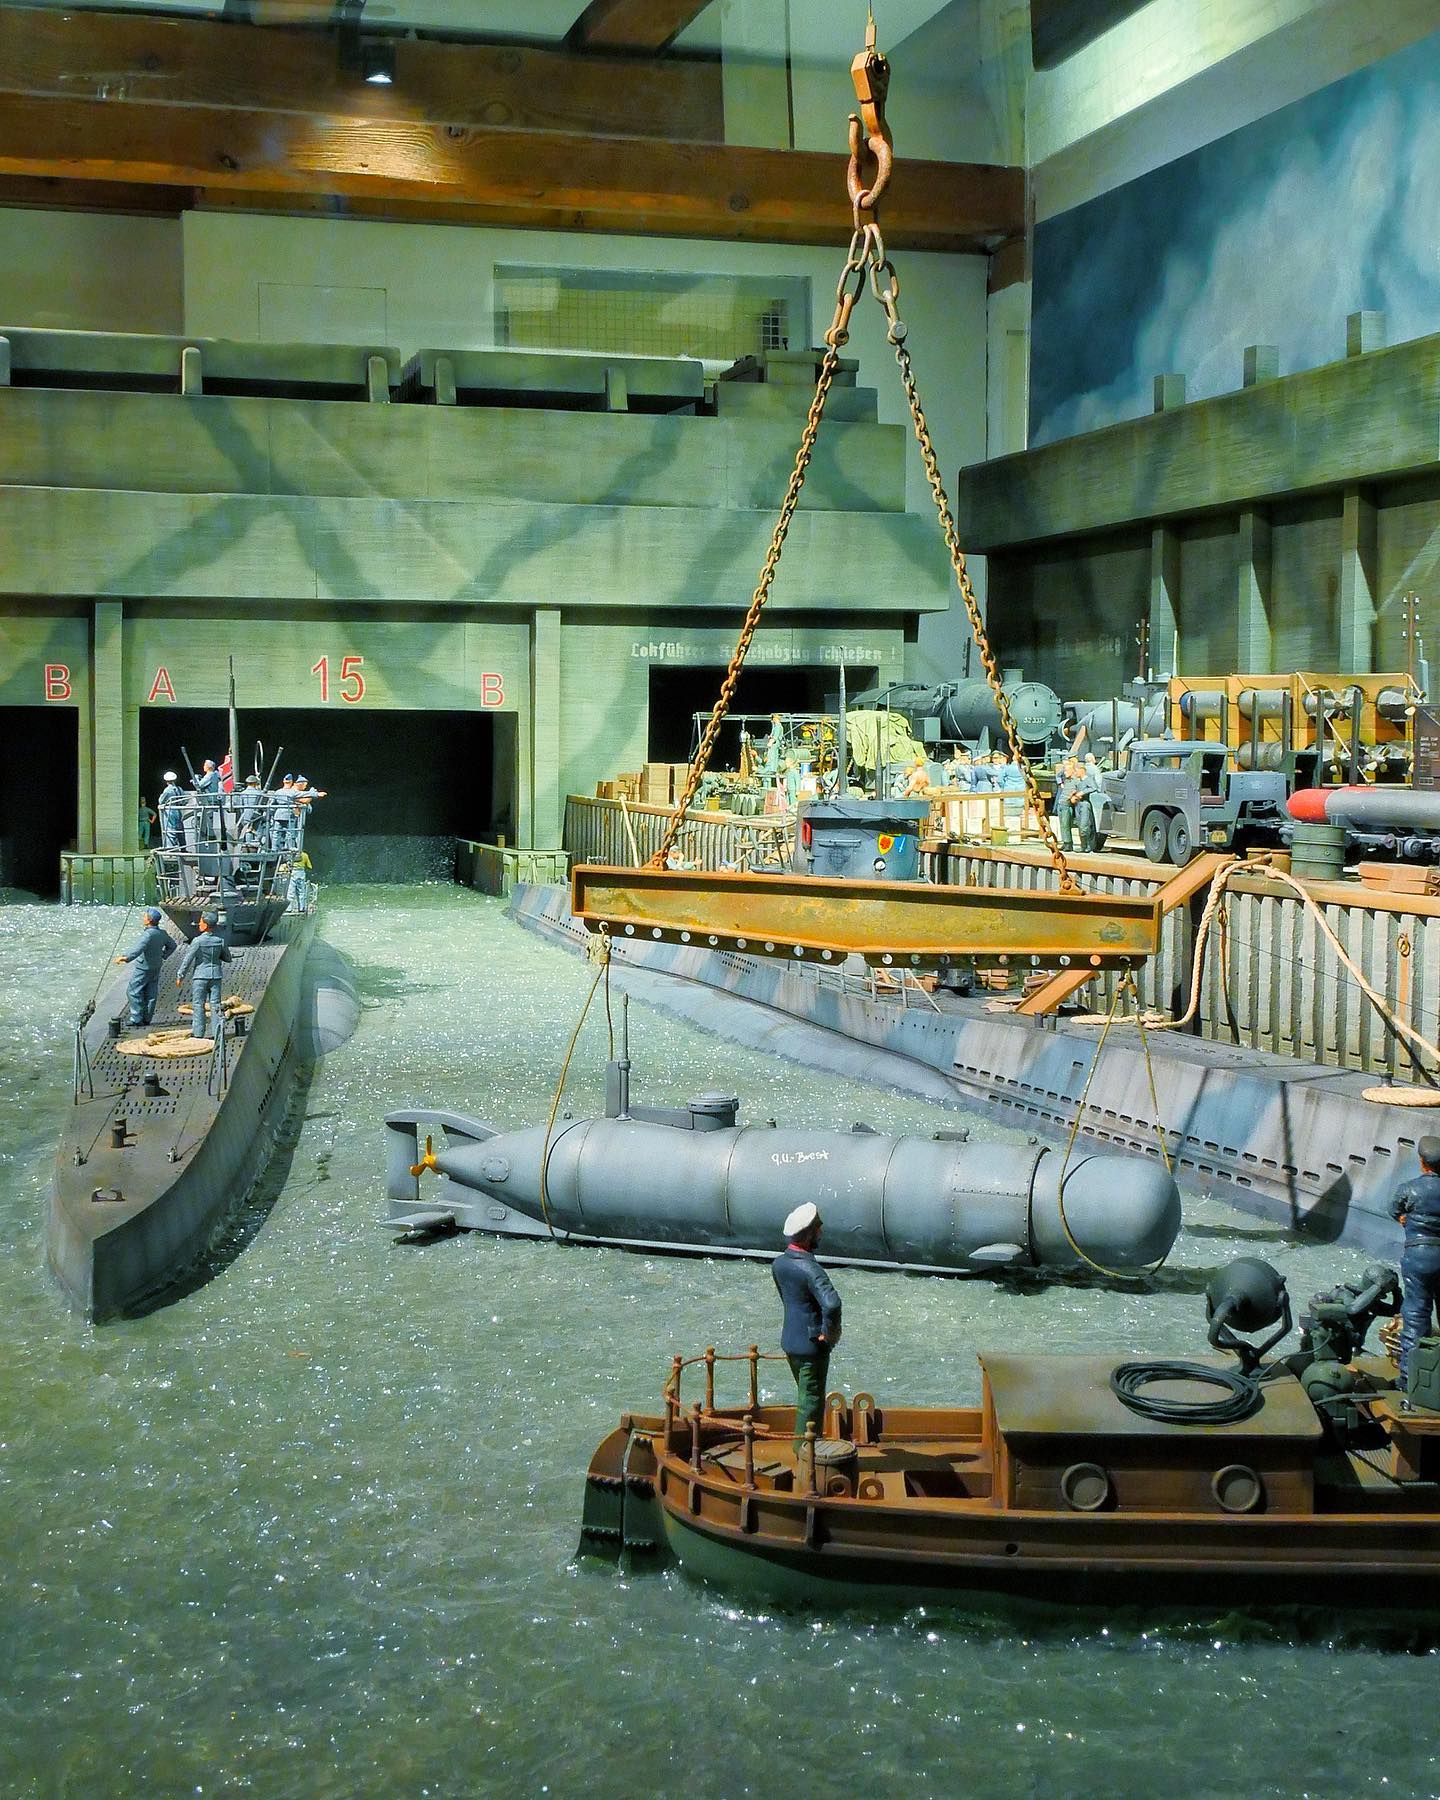 Submarine Diorama. This over 3 meters lang diorama was built by Siegfried Möhrman in a scale of 1:35. It was one of the last acquisitions made by our funder Prof. Peter Tamm before his passing. It is displayed in our exhibition dedicated to the history of subaquatic warfare, on deck 5 of the museum.